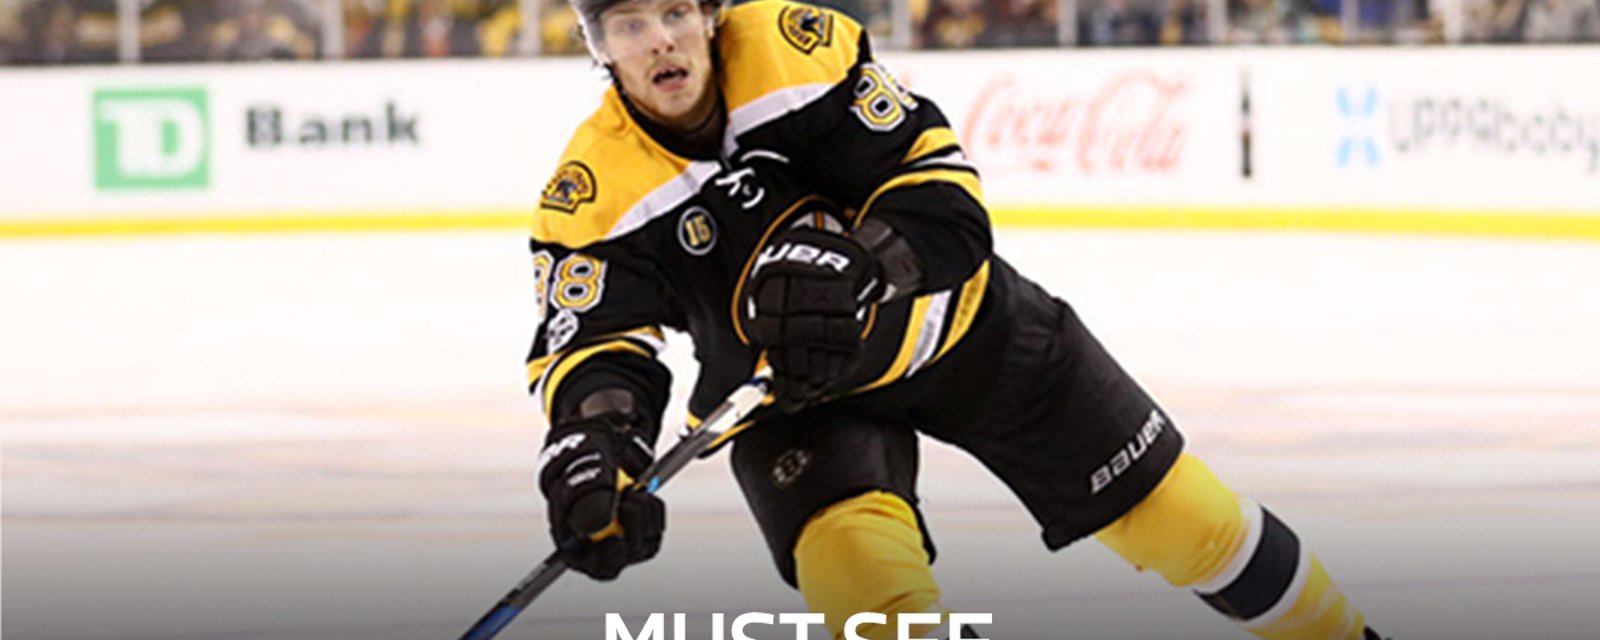 Must see: David Pastrnak game-winning goal is a thing of beauty!